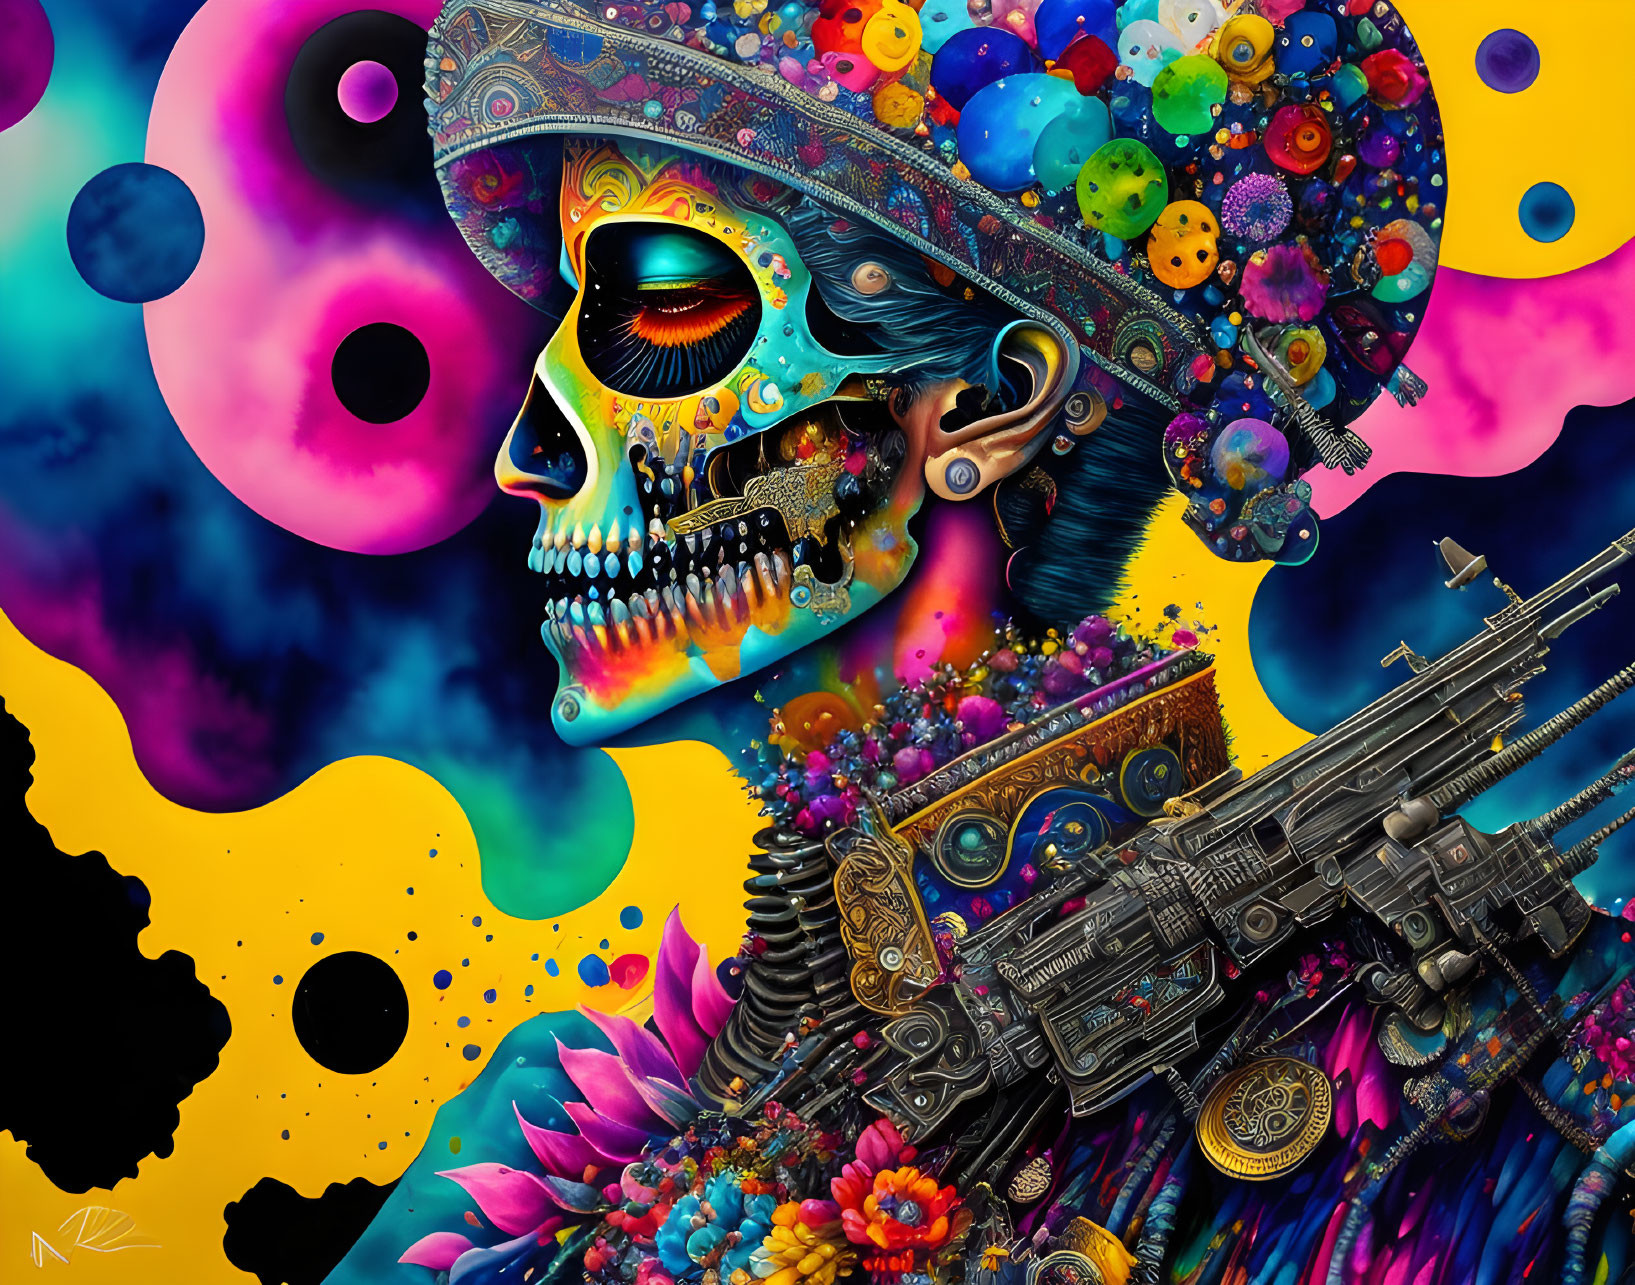 Colorful Decorated Skull Artwork with Floral and Mechanical Elements